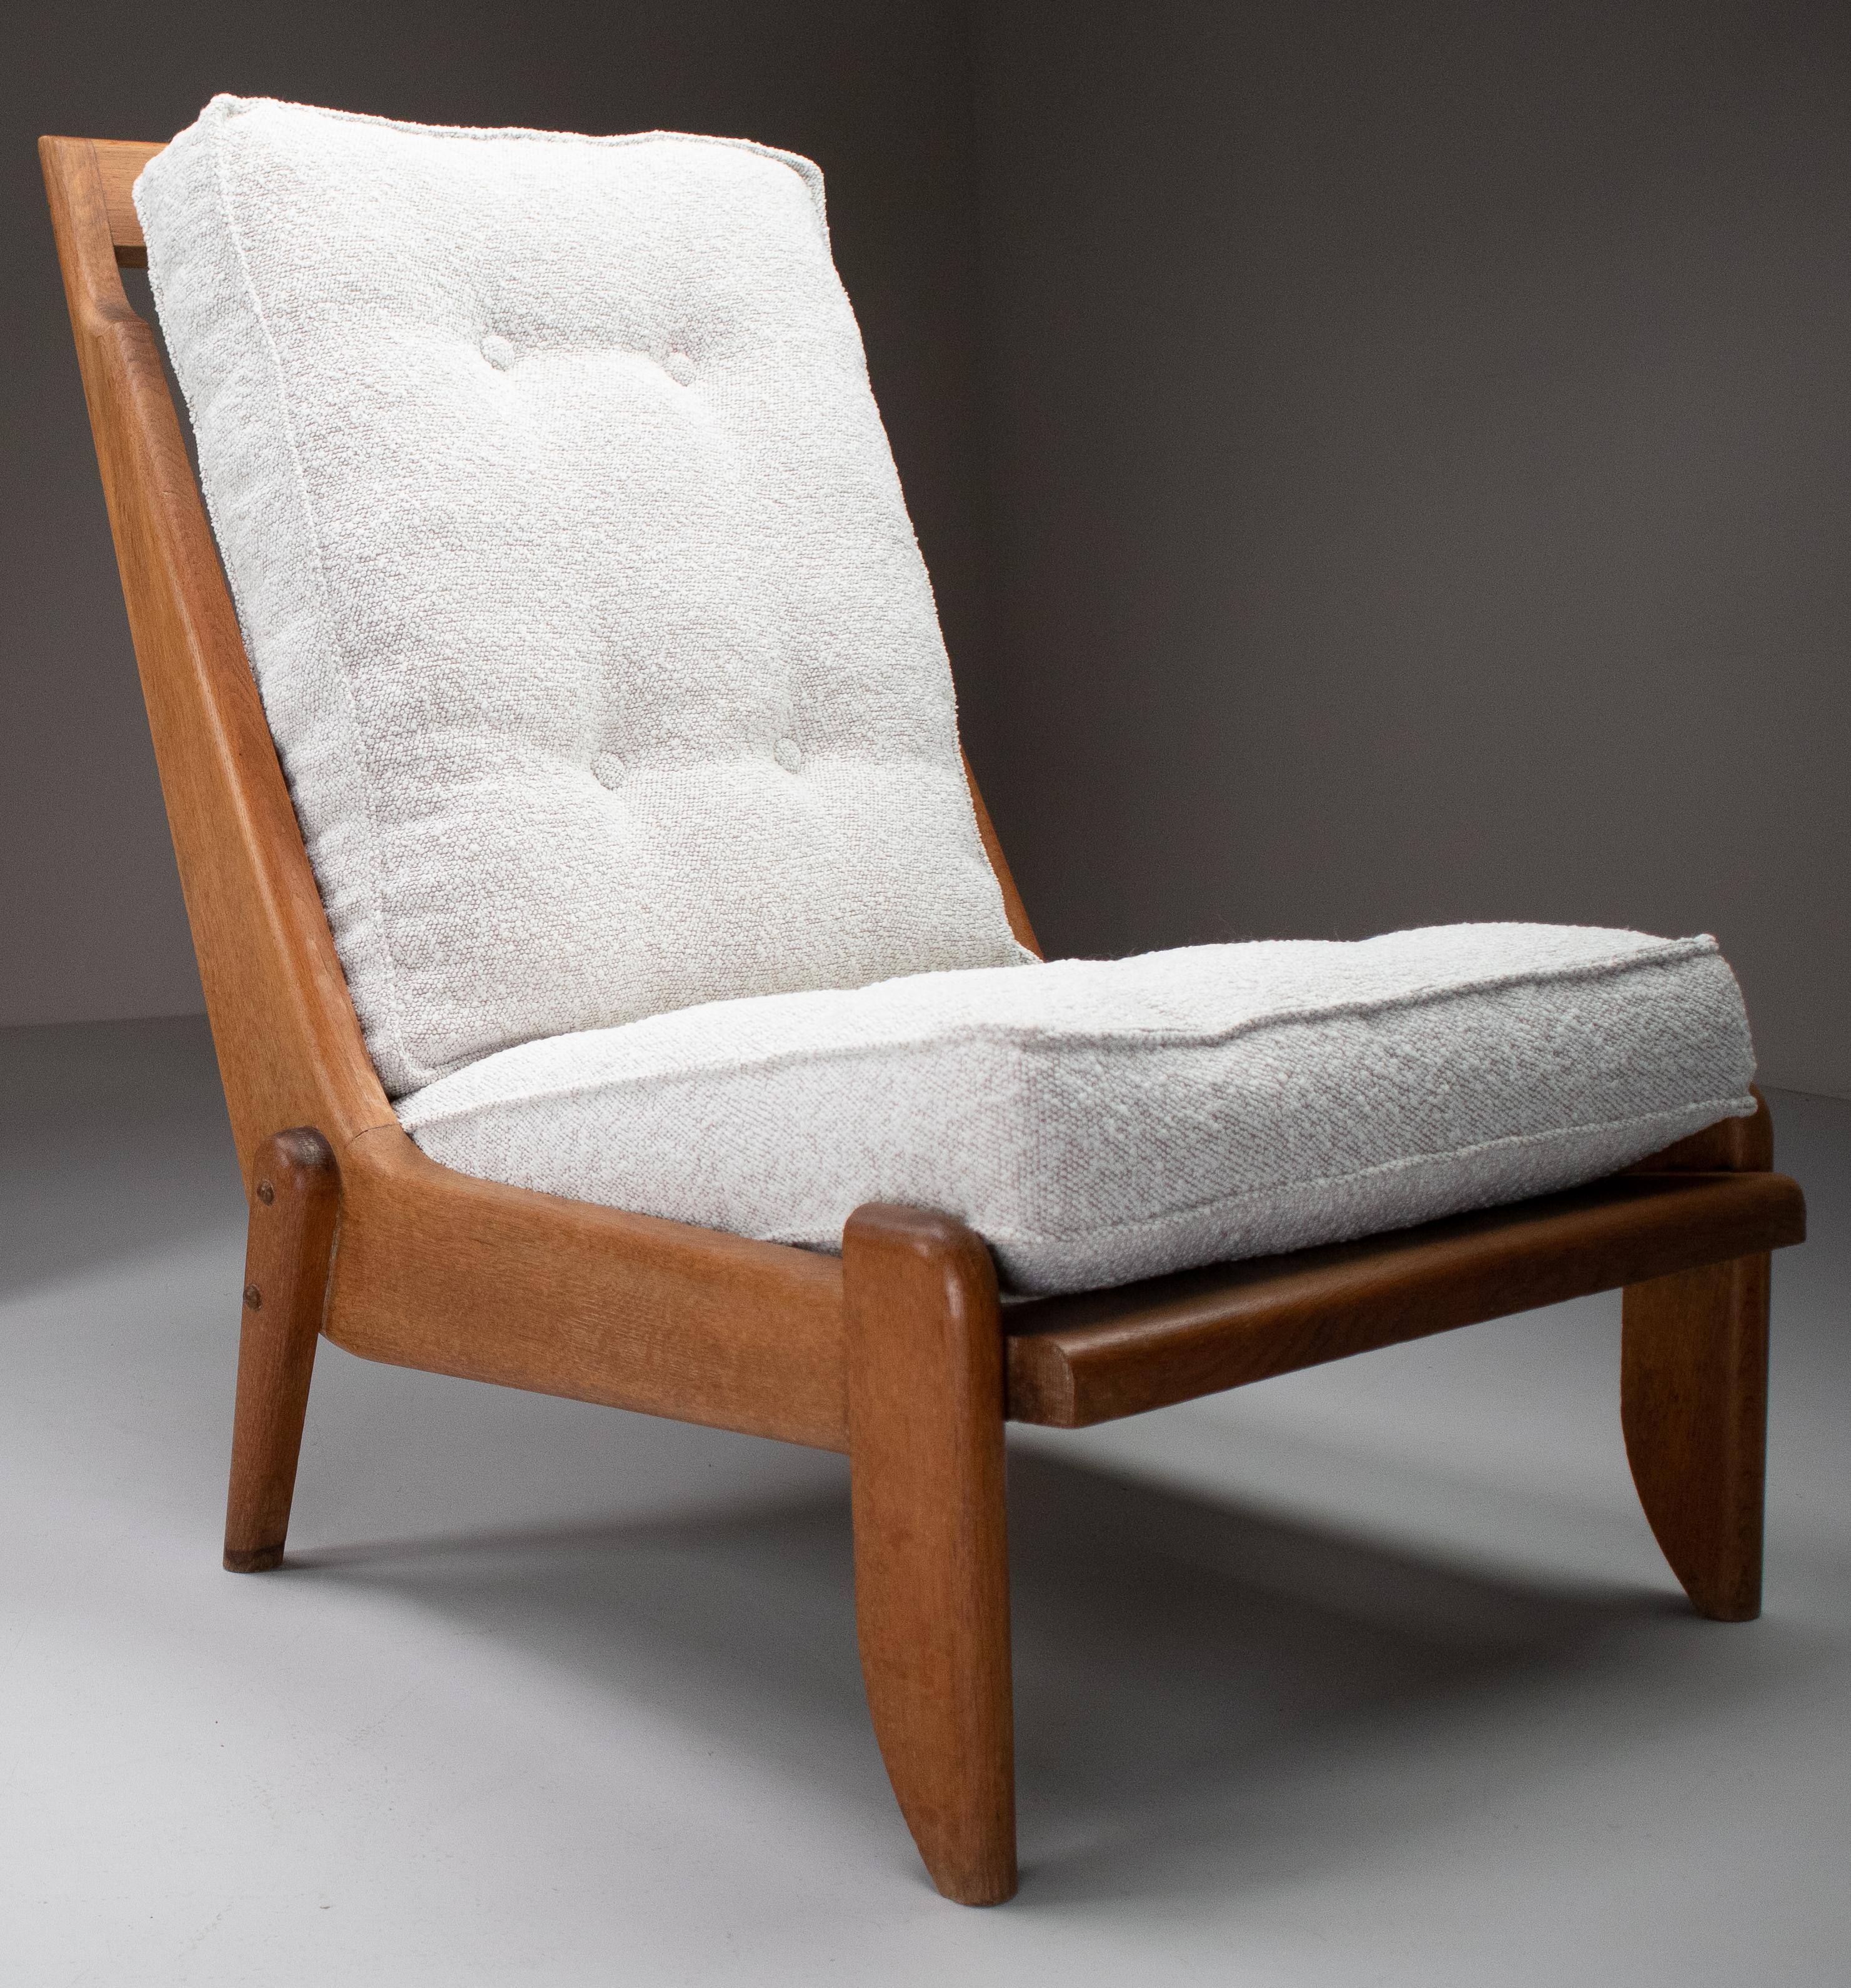 20th Century Guillerme et Chambron Lounge Chairs in Blond Oak and Bouclé Fabric, France, 1950